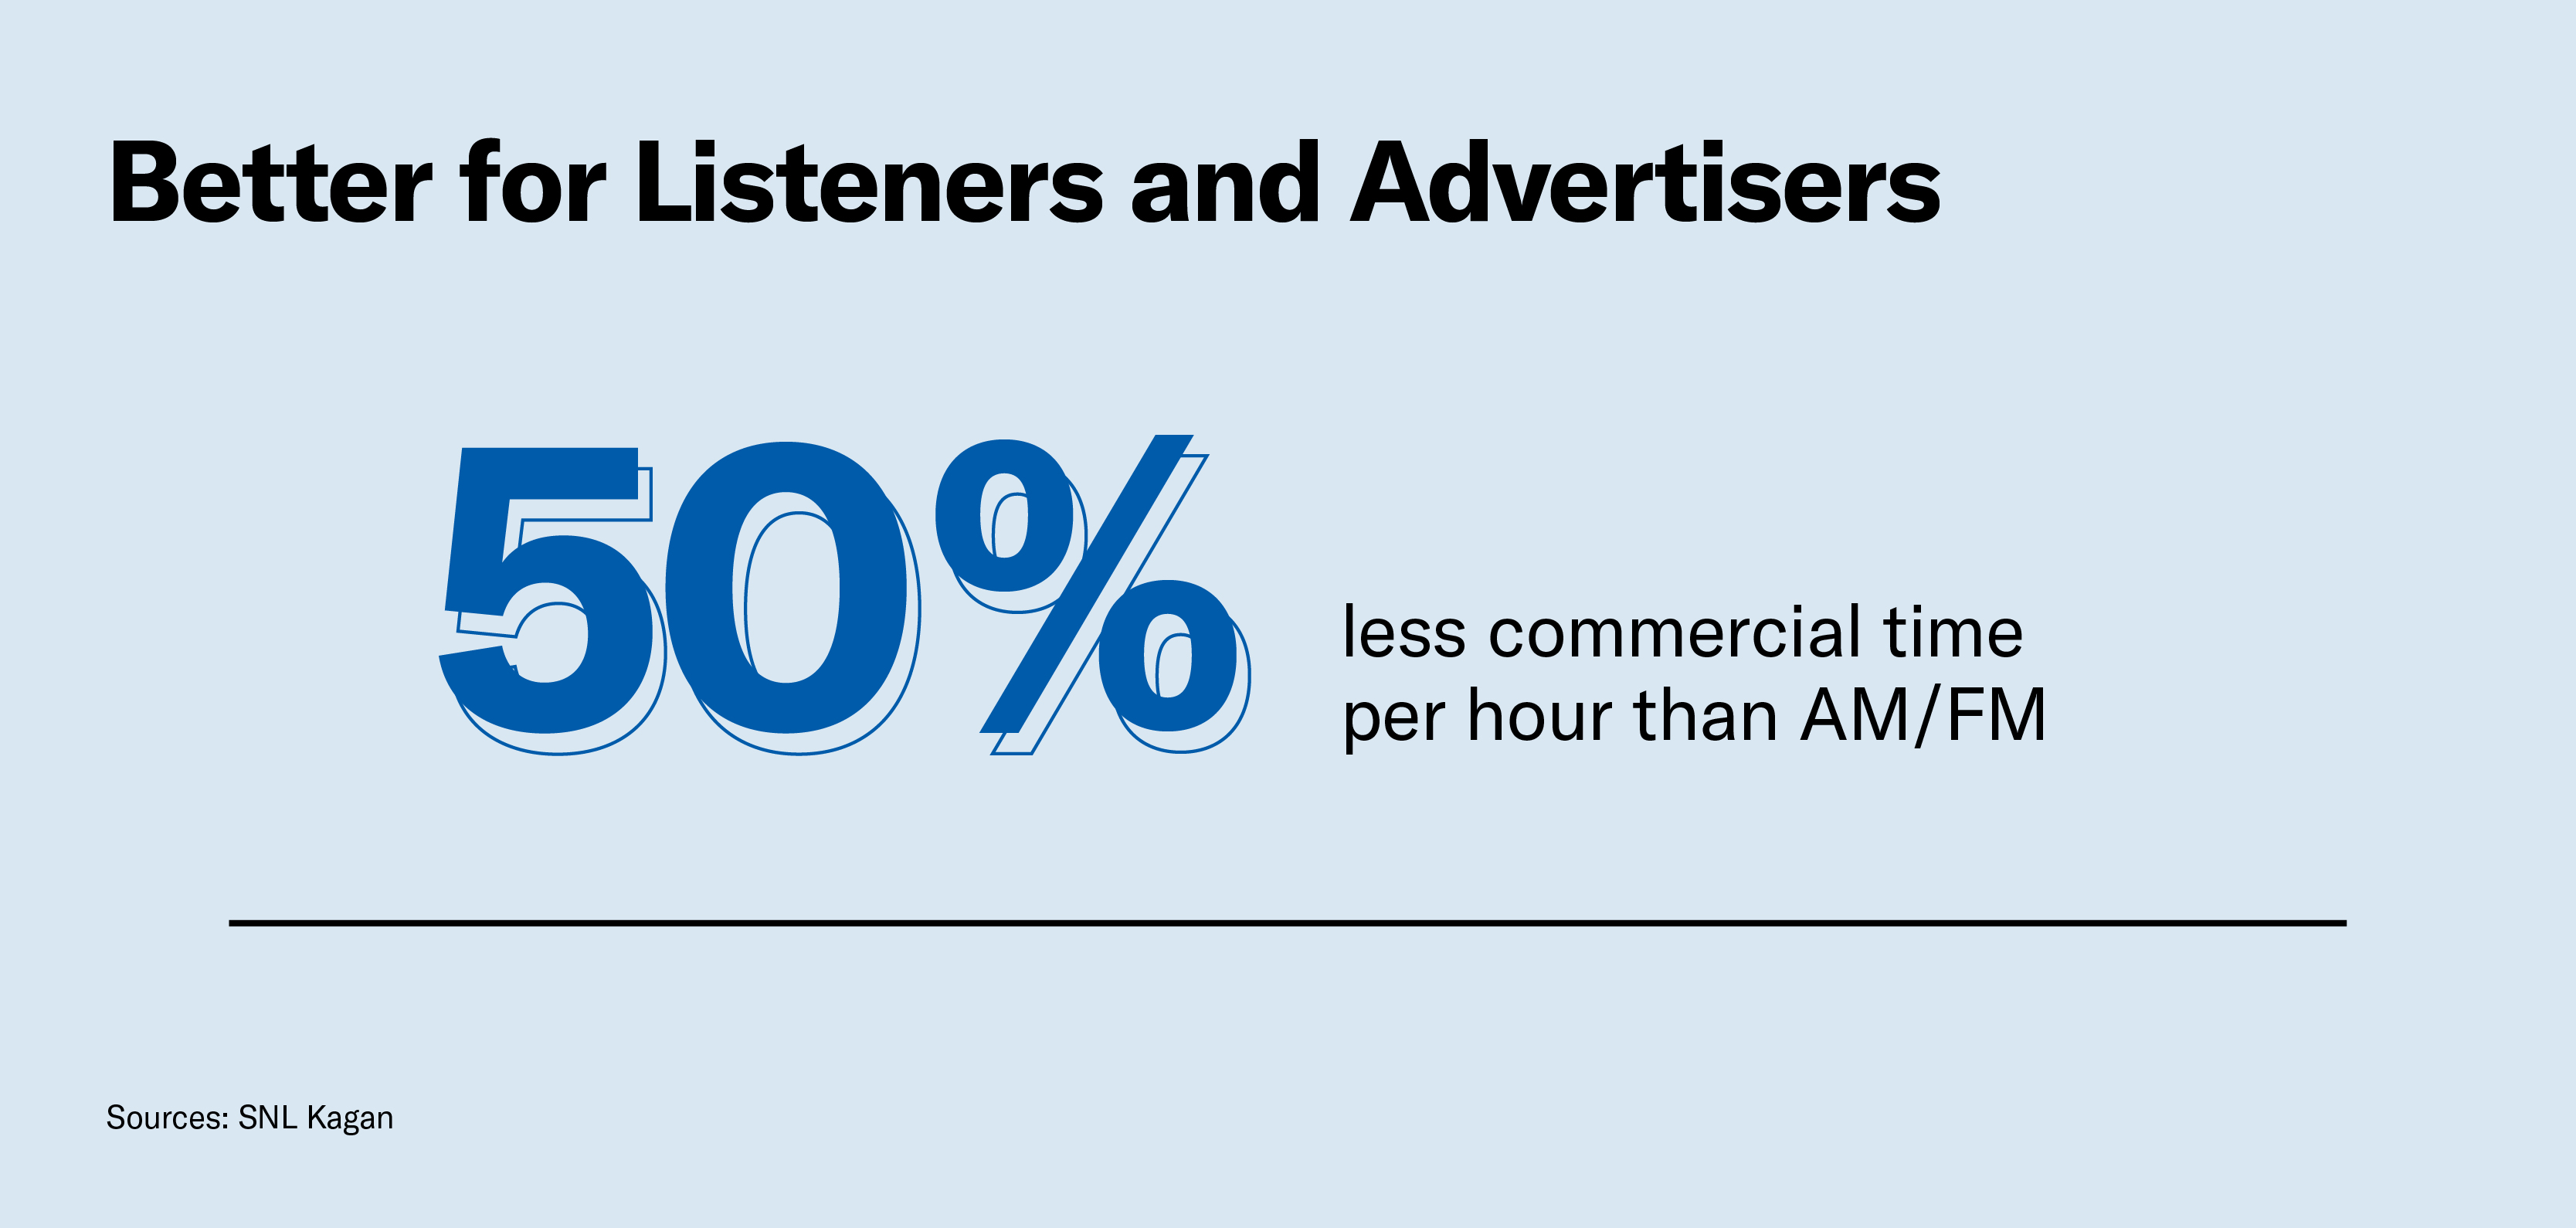 SiriusXM is better for advertisers than AM/FM radio